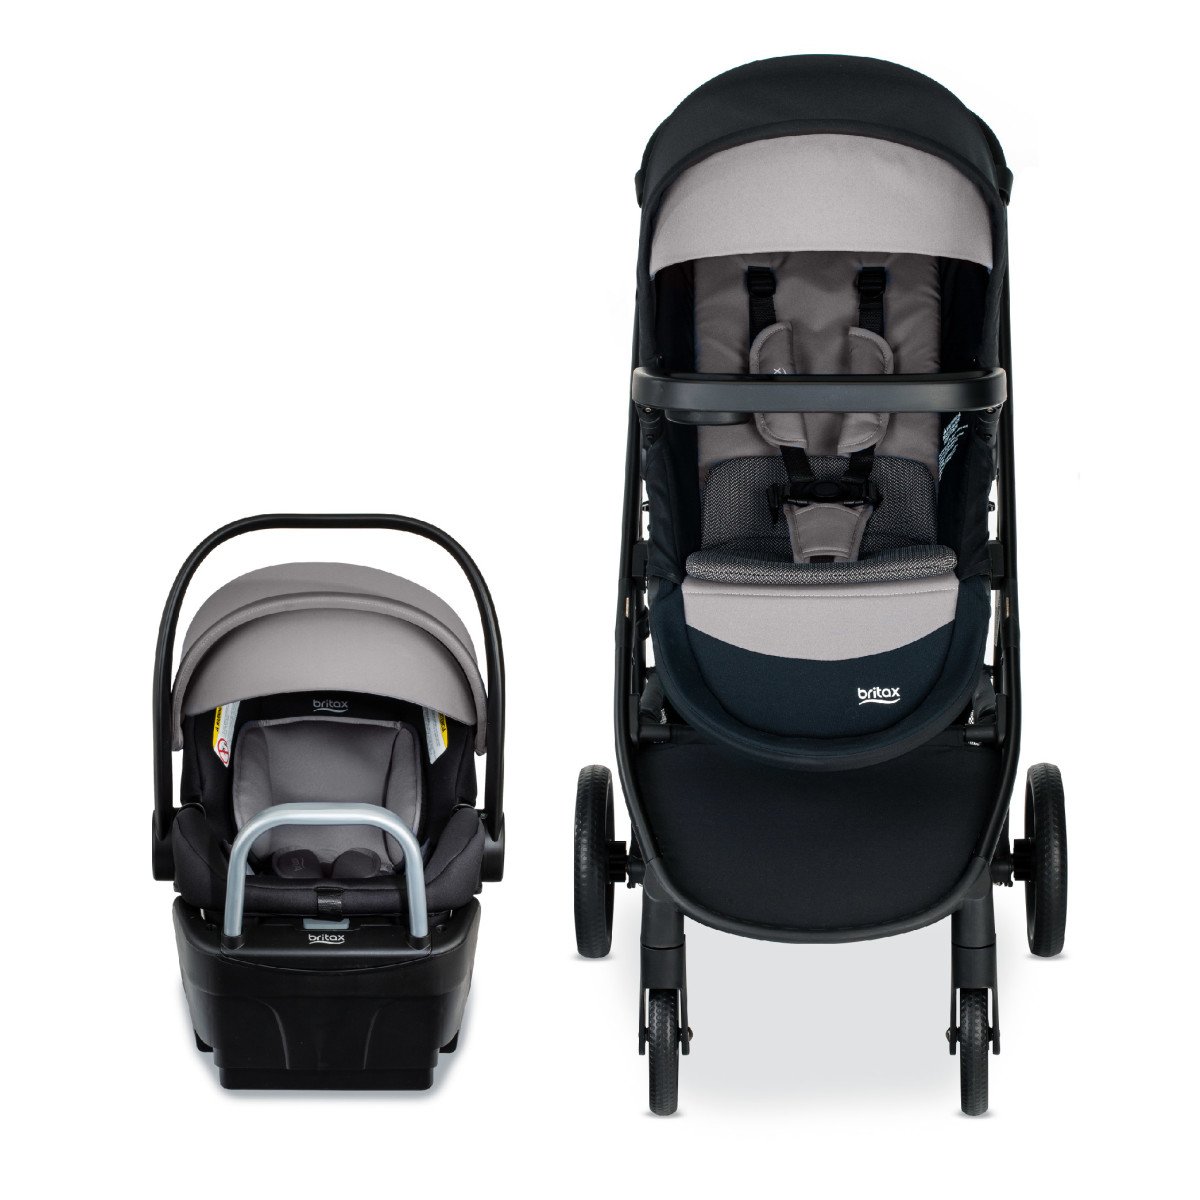 Center facing view of the Willow S Infant Car Seat and Brook+ Stroller